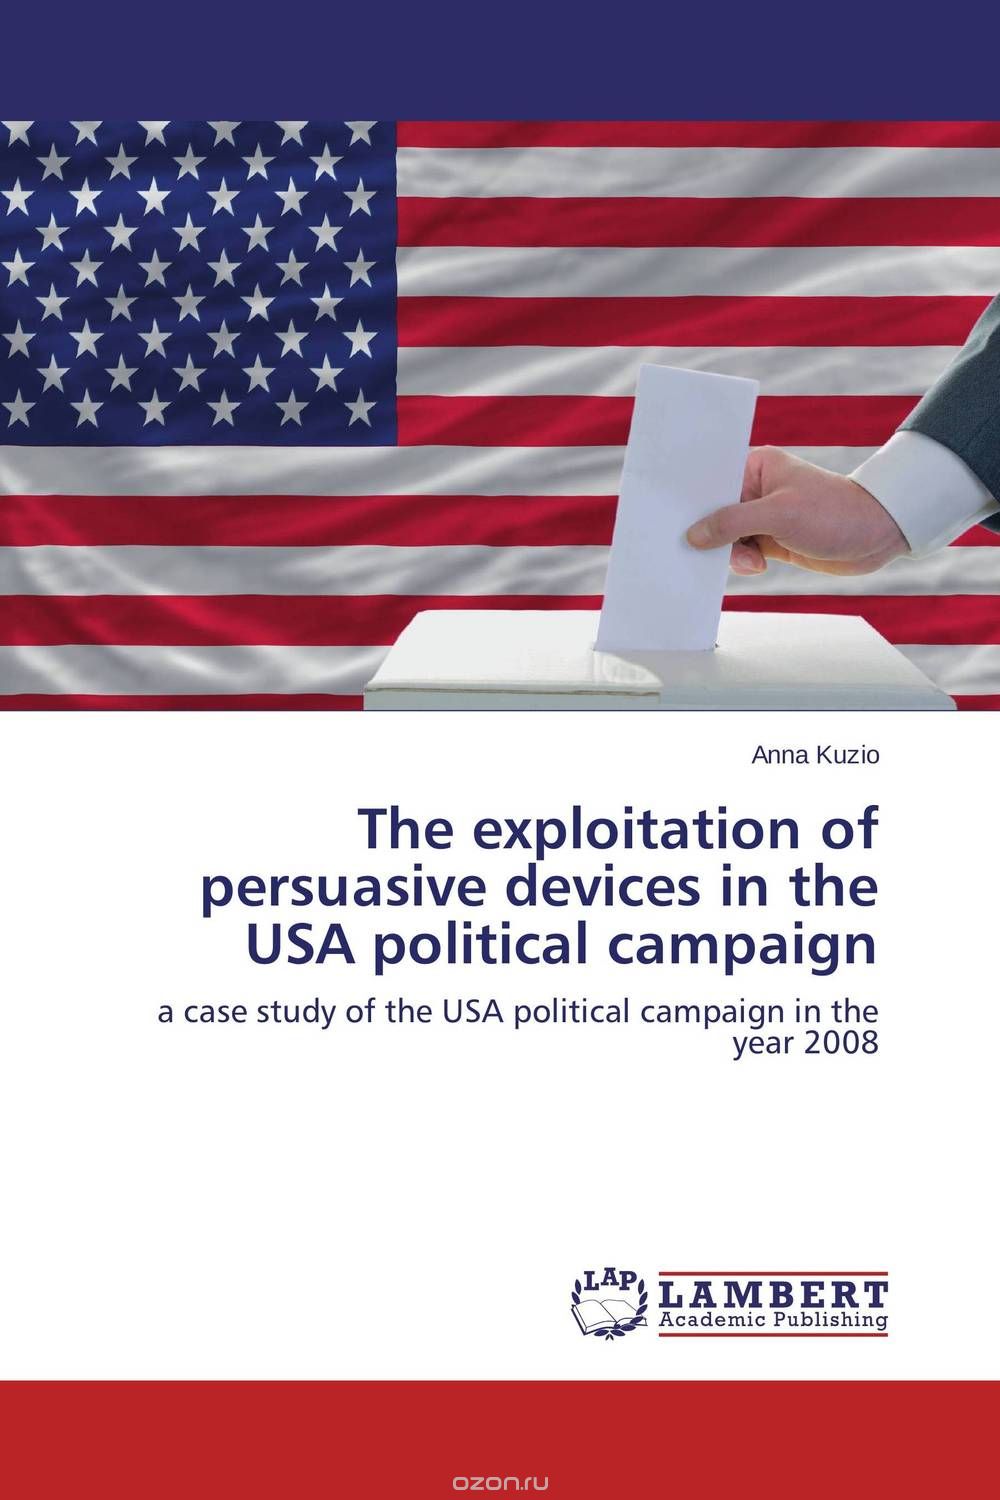 Скачать книгу "The exploitation of persuasive devices in the USA political campaign"